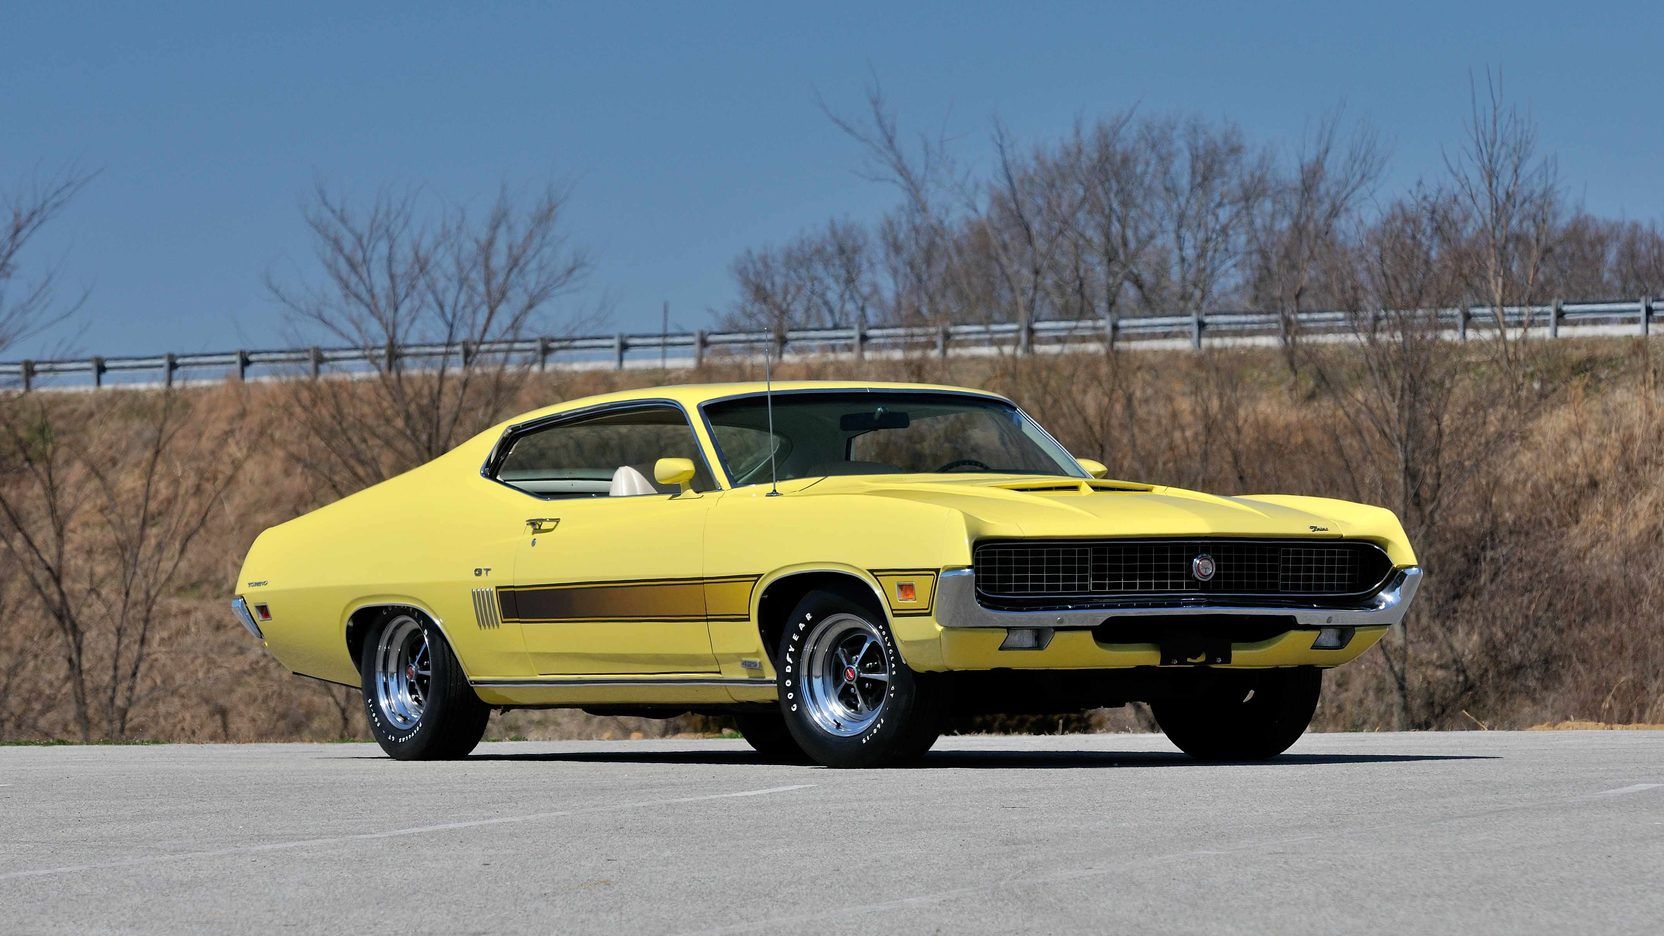 A parked yellow 1970 Ford Torino GT